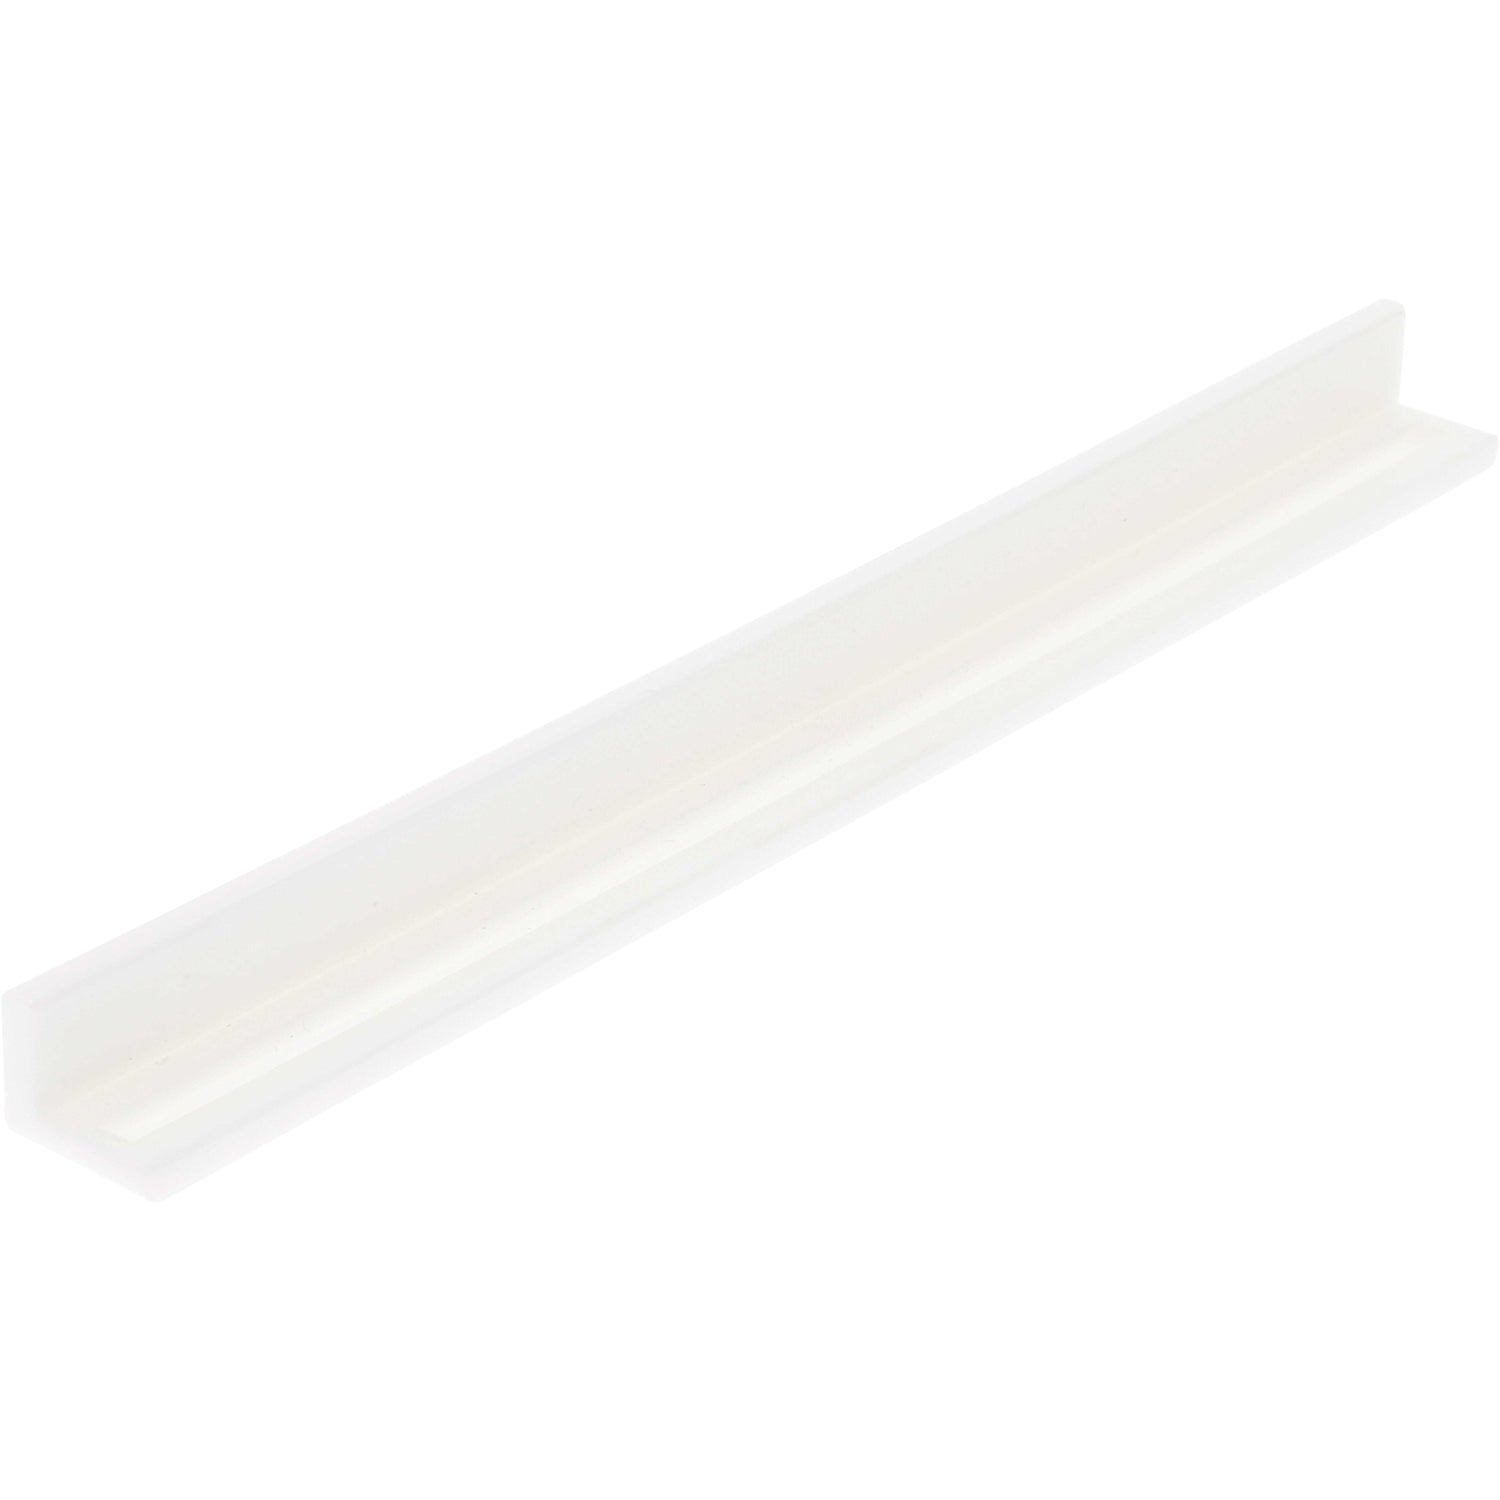 White plastic 90 degree rail with a groove machined into one of the inner surfaces of the part. Part is shown on white background. 